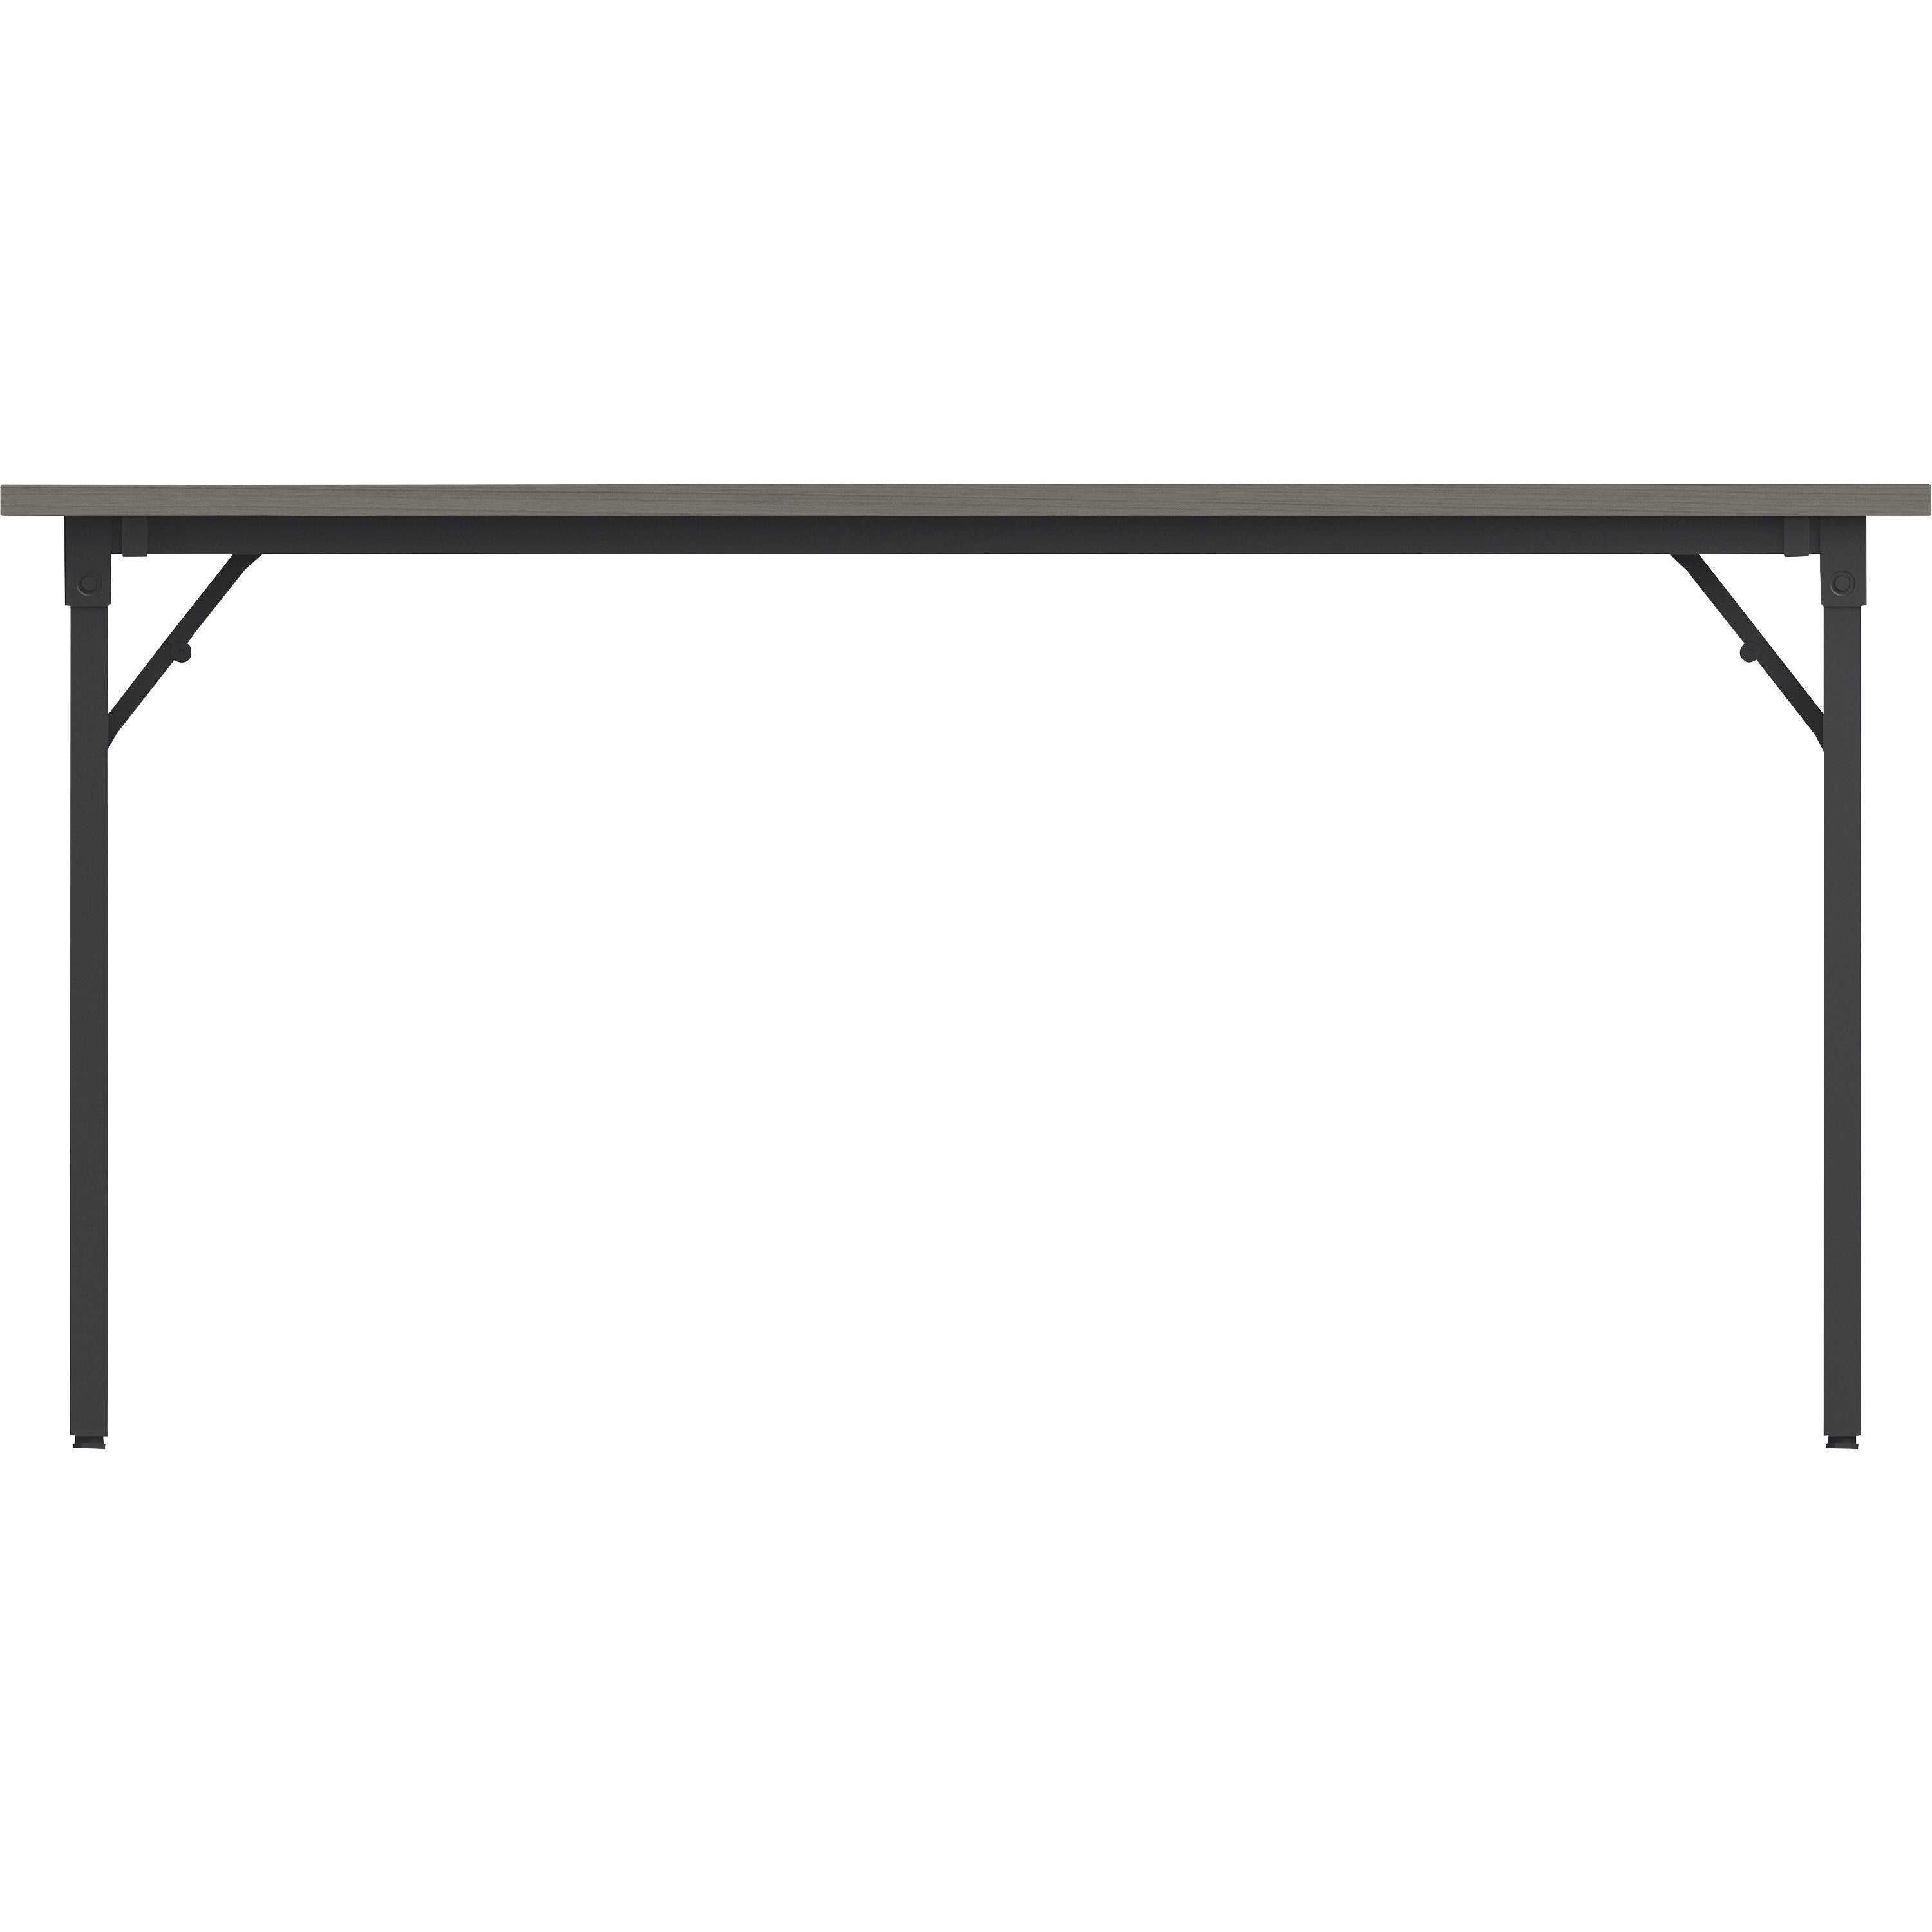 lorell-folding-training-table-for-table-topmelamine-top-x-60-table-top-width-x-18-table-top-depth-x-1-table-top-thickness-30-height-assembly-required-gray-1-each_llr60746 - 3